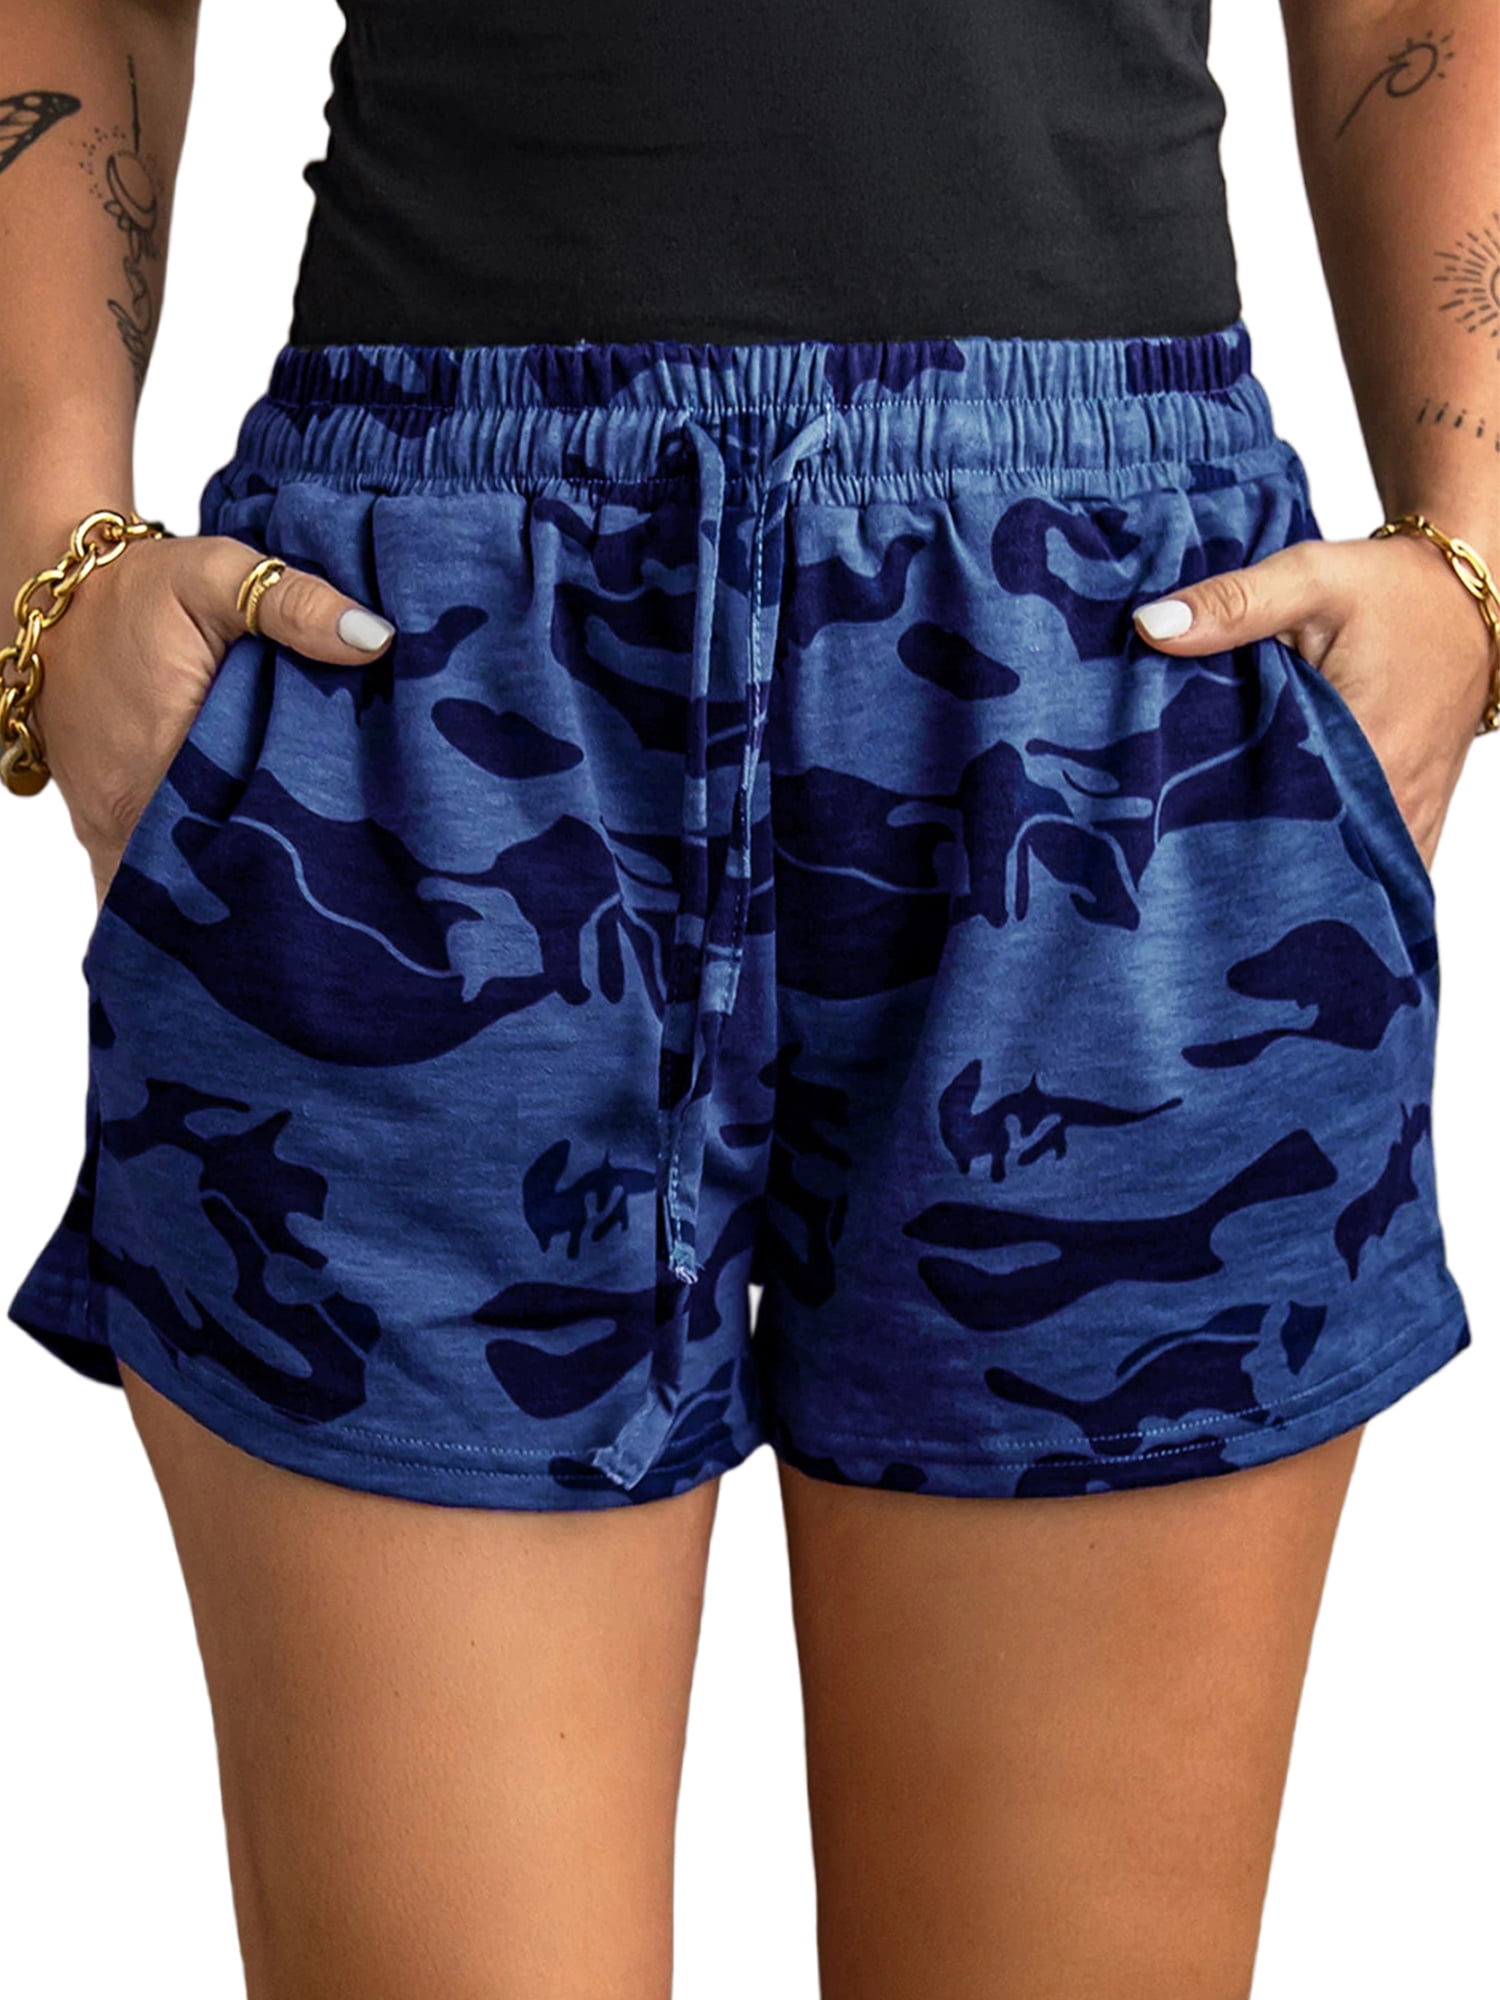 Women’s Ladies Lace Floral Stretch Board Swimming Summer Hot Mini Pants Shorts 